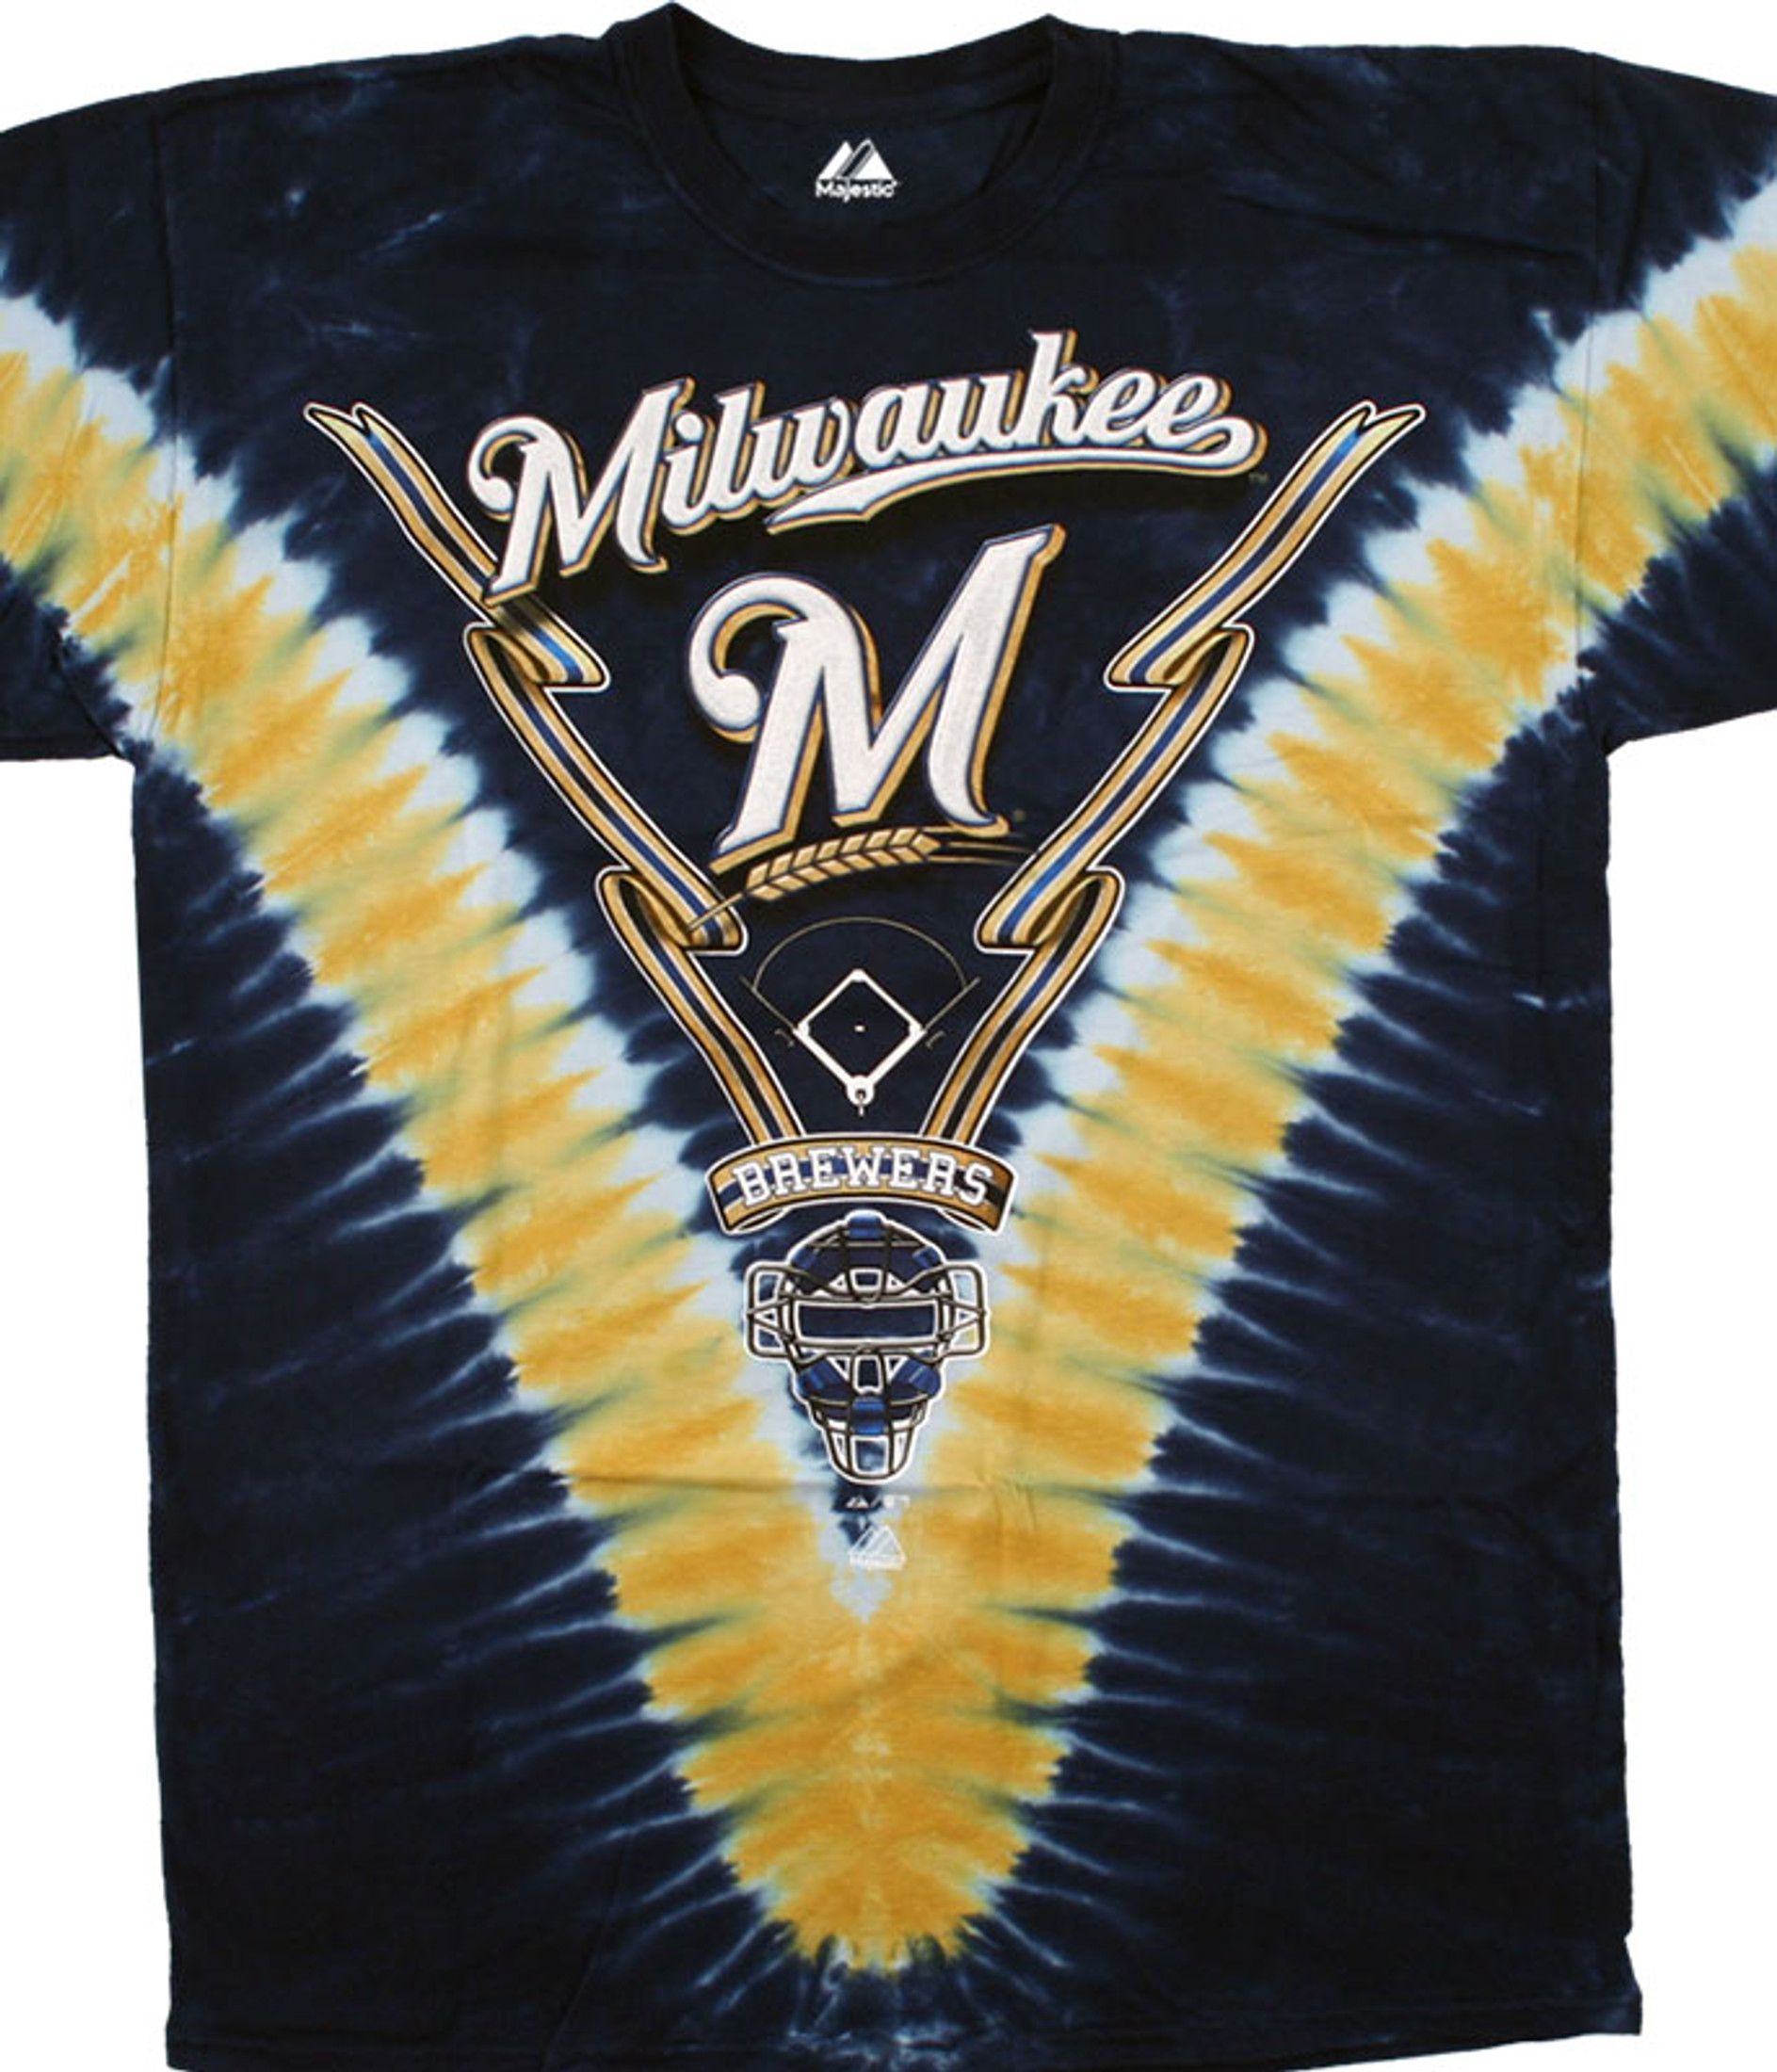 Brewers Tee  Tops & tees, Tees, Clothes design